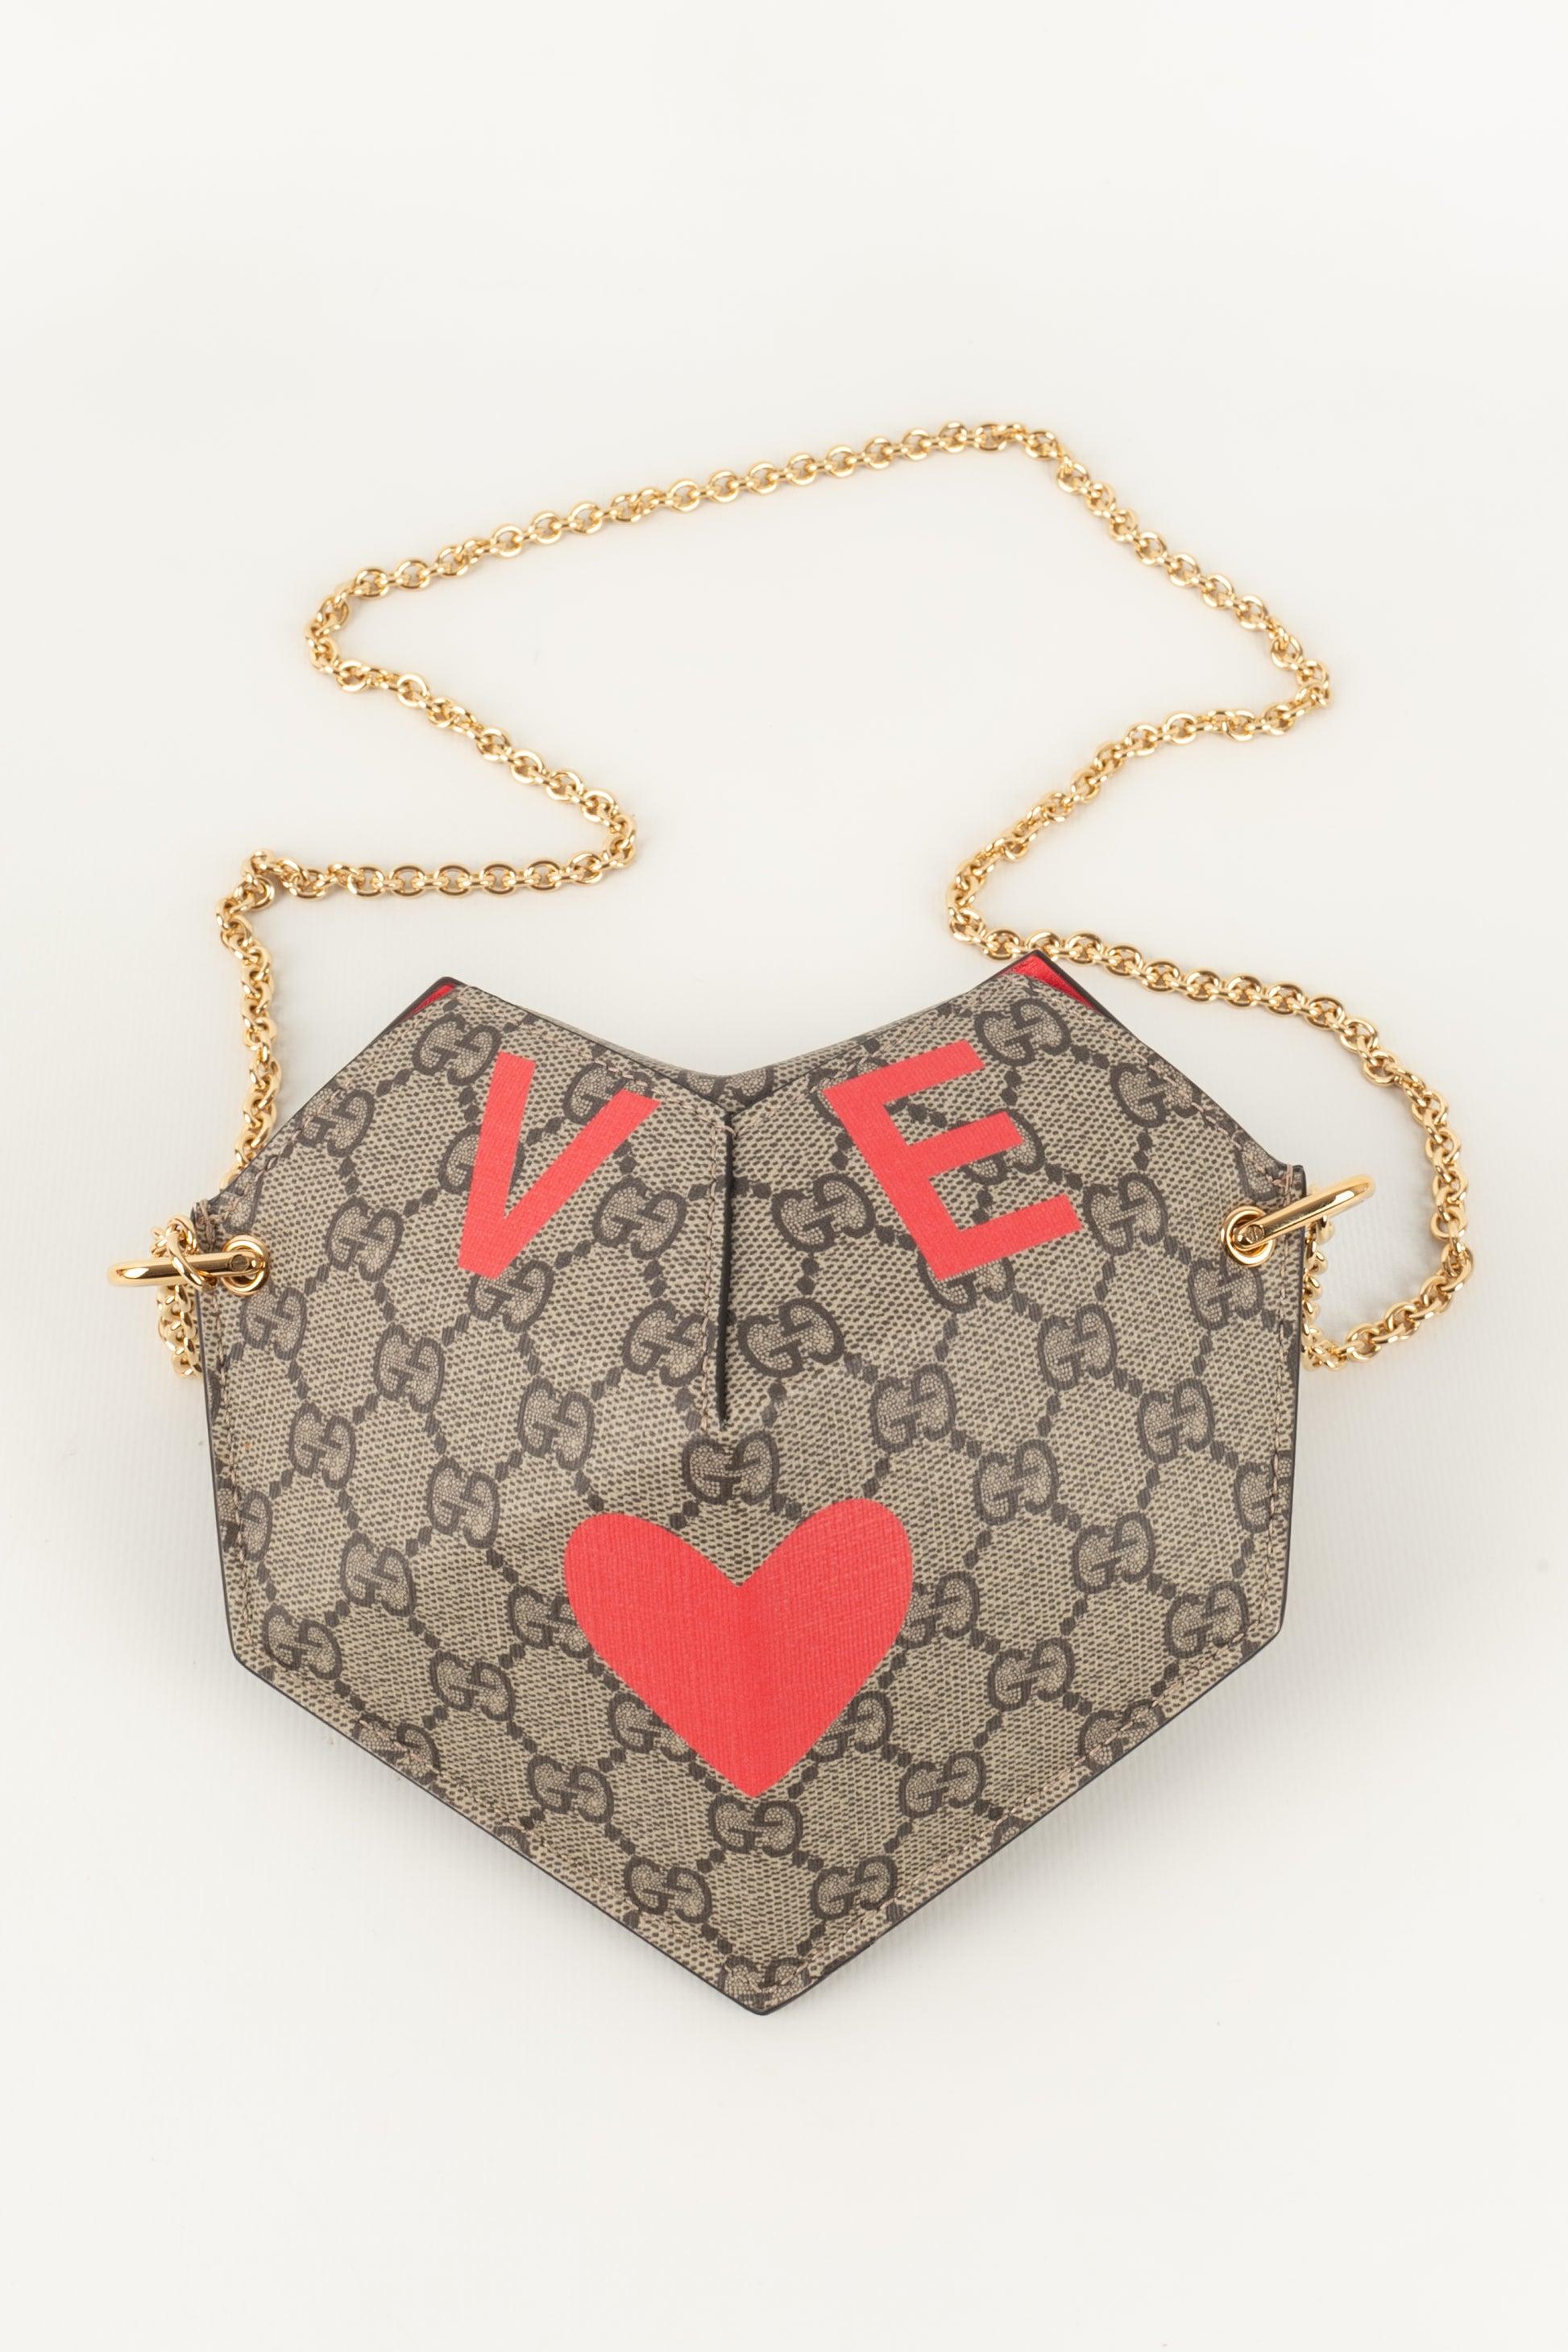 Women's Gucci Valentine's Day Heart Leather Bag Printed with GG Monogramms For Sale